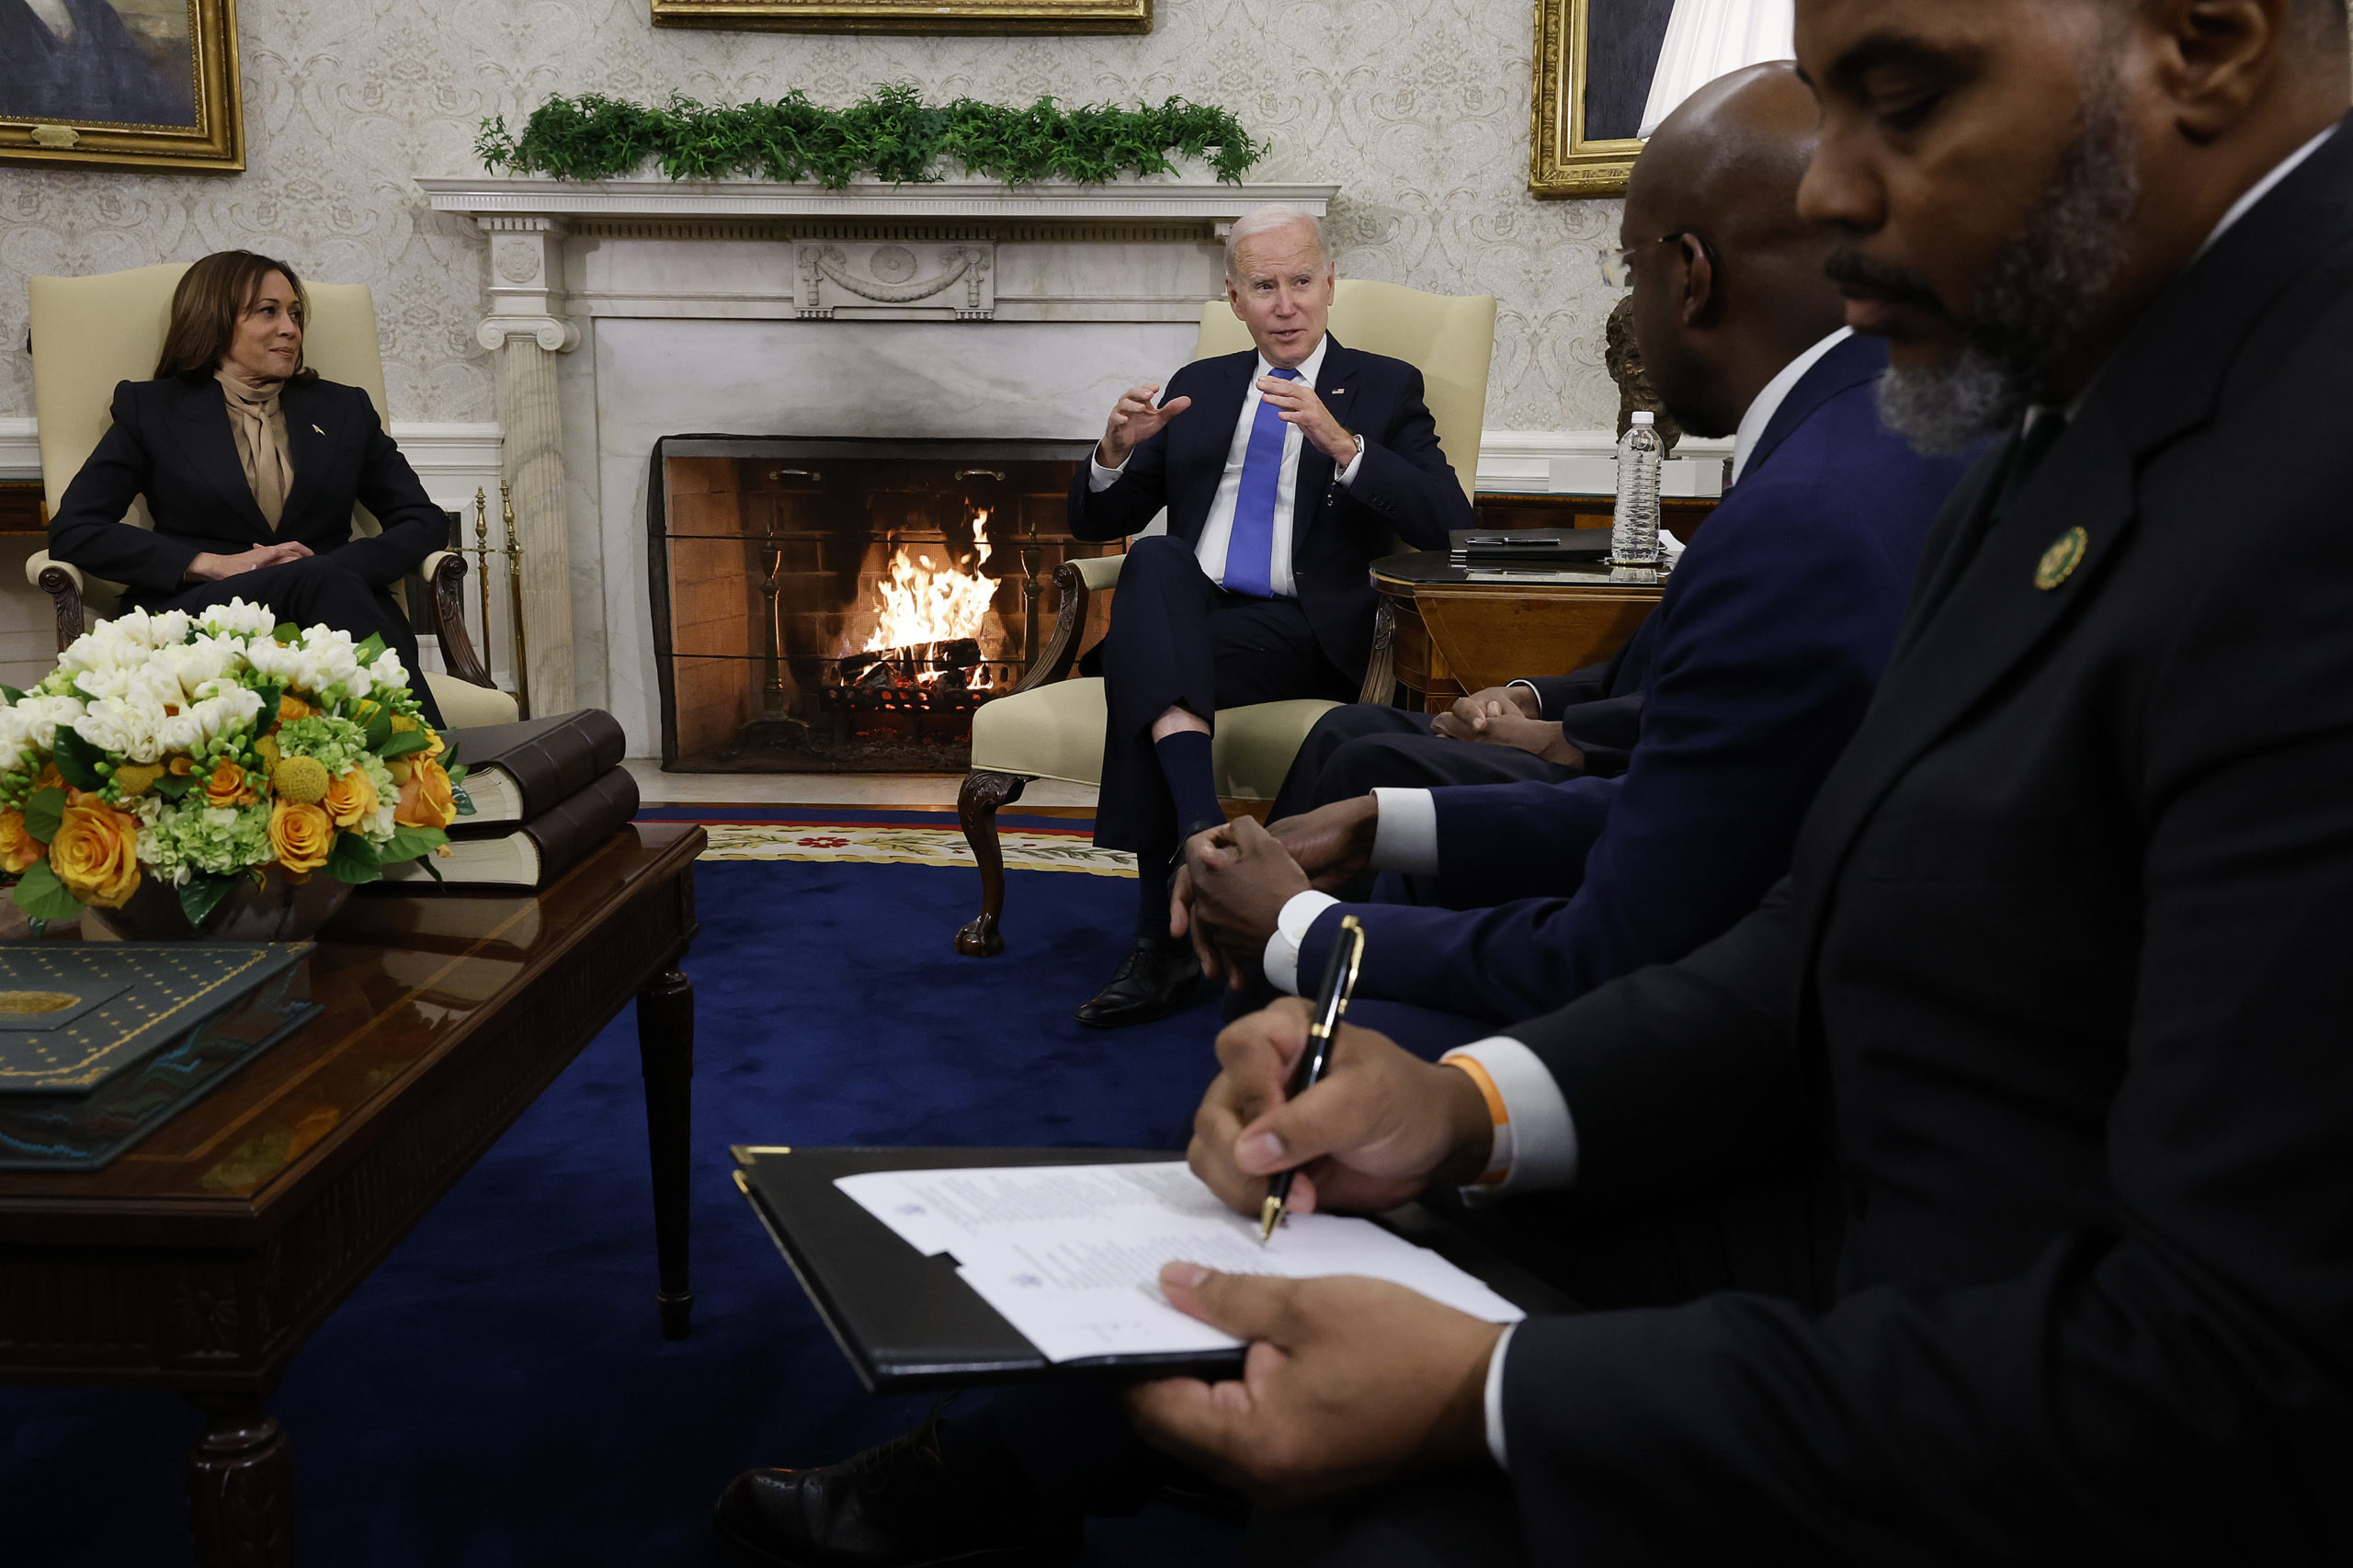 U.S. President Joe Biden and Vice President Kamala Harris (L) host a meeting with members of the Congressional Black Caucus, including Sen. Raphael Warnock (D-GA) and Rep. Steven Horsford (D-NV), in the Oval Office at the White House on February 02, 2023 in Washington, DC. Members of the caucus encouraged the administration to push for national law enforcement reform in the wake of several high-profile killings of unarmed Black men, most recently the beating death of Tyre Nichols by Memphis police officers. (Photo by Chip Somodevilla/Getty Images)